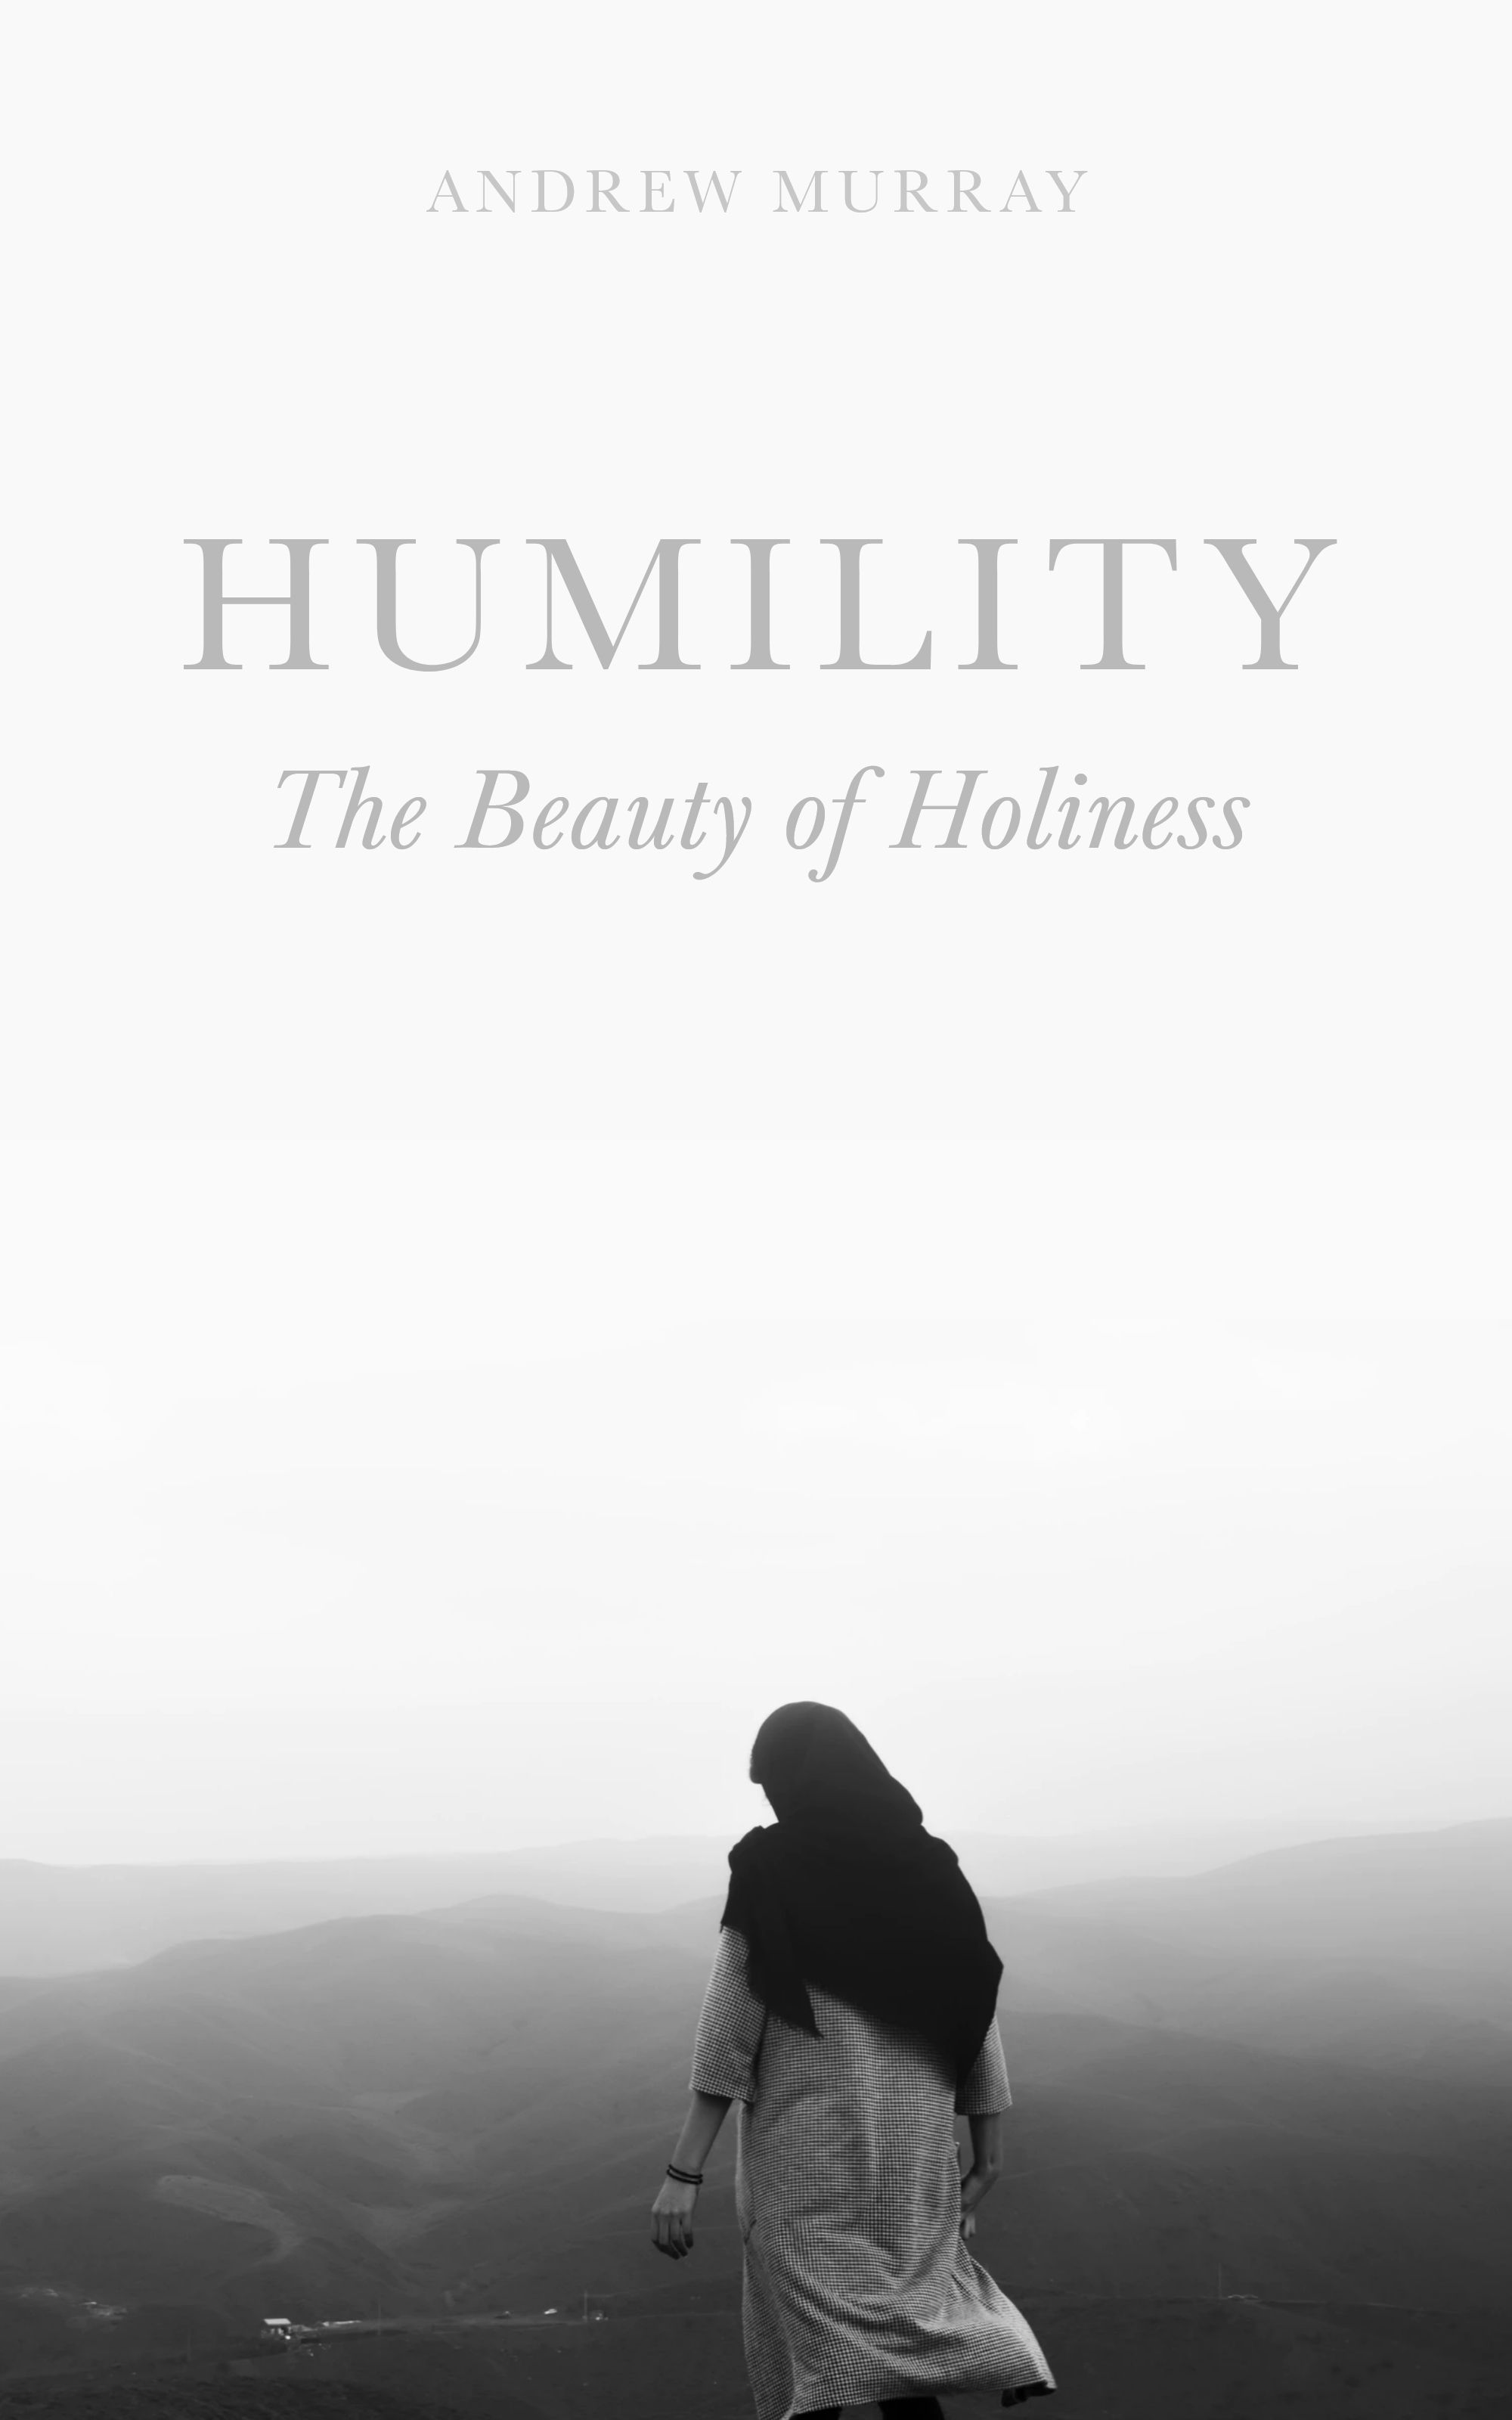 Book cover for Humility, by Andrew Murray, shows a woman with a head covering looking down to a village from a windy hilltop